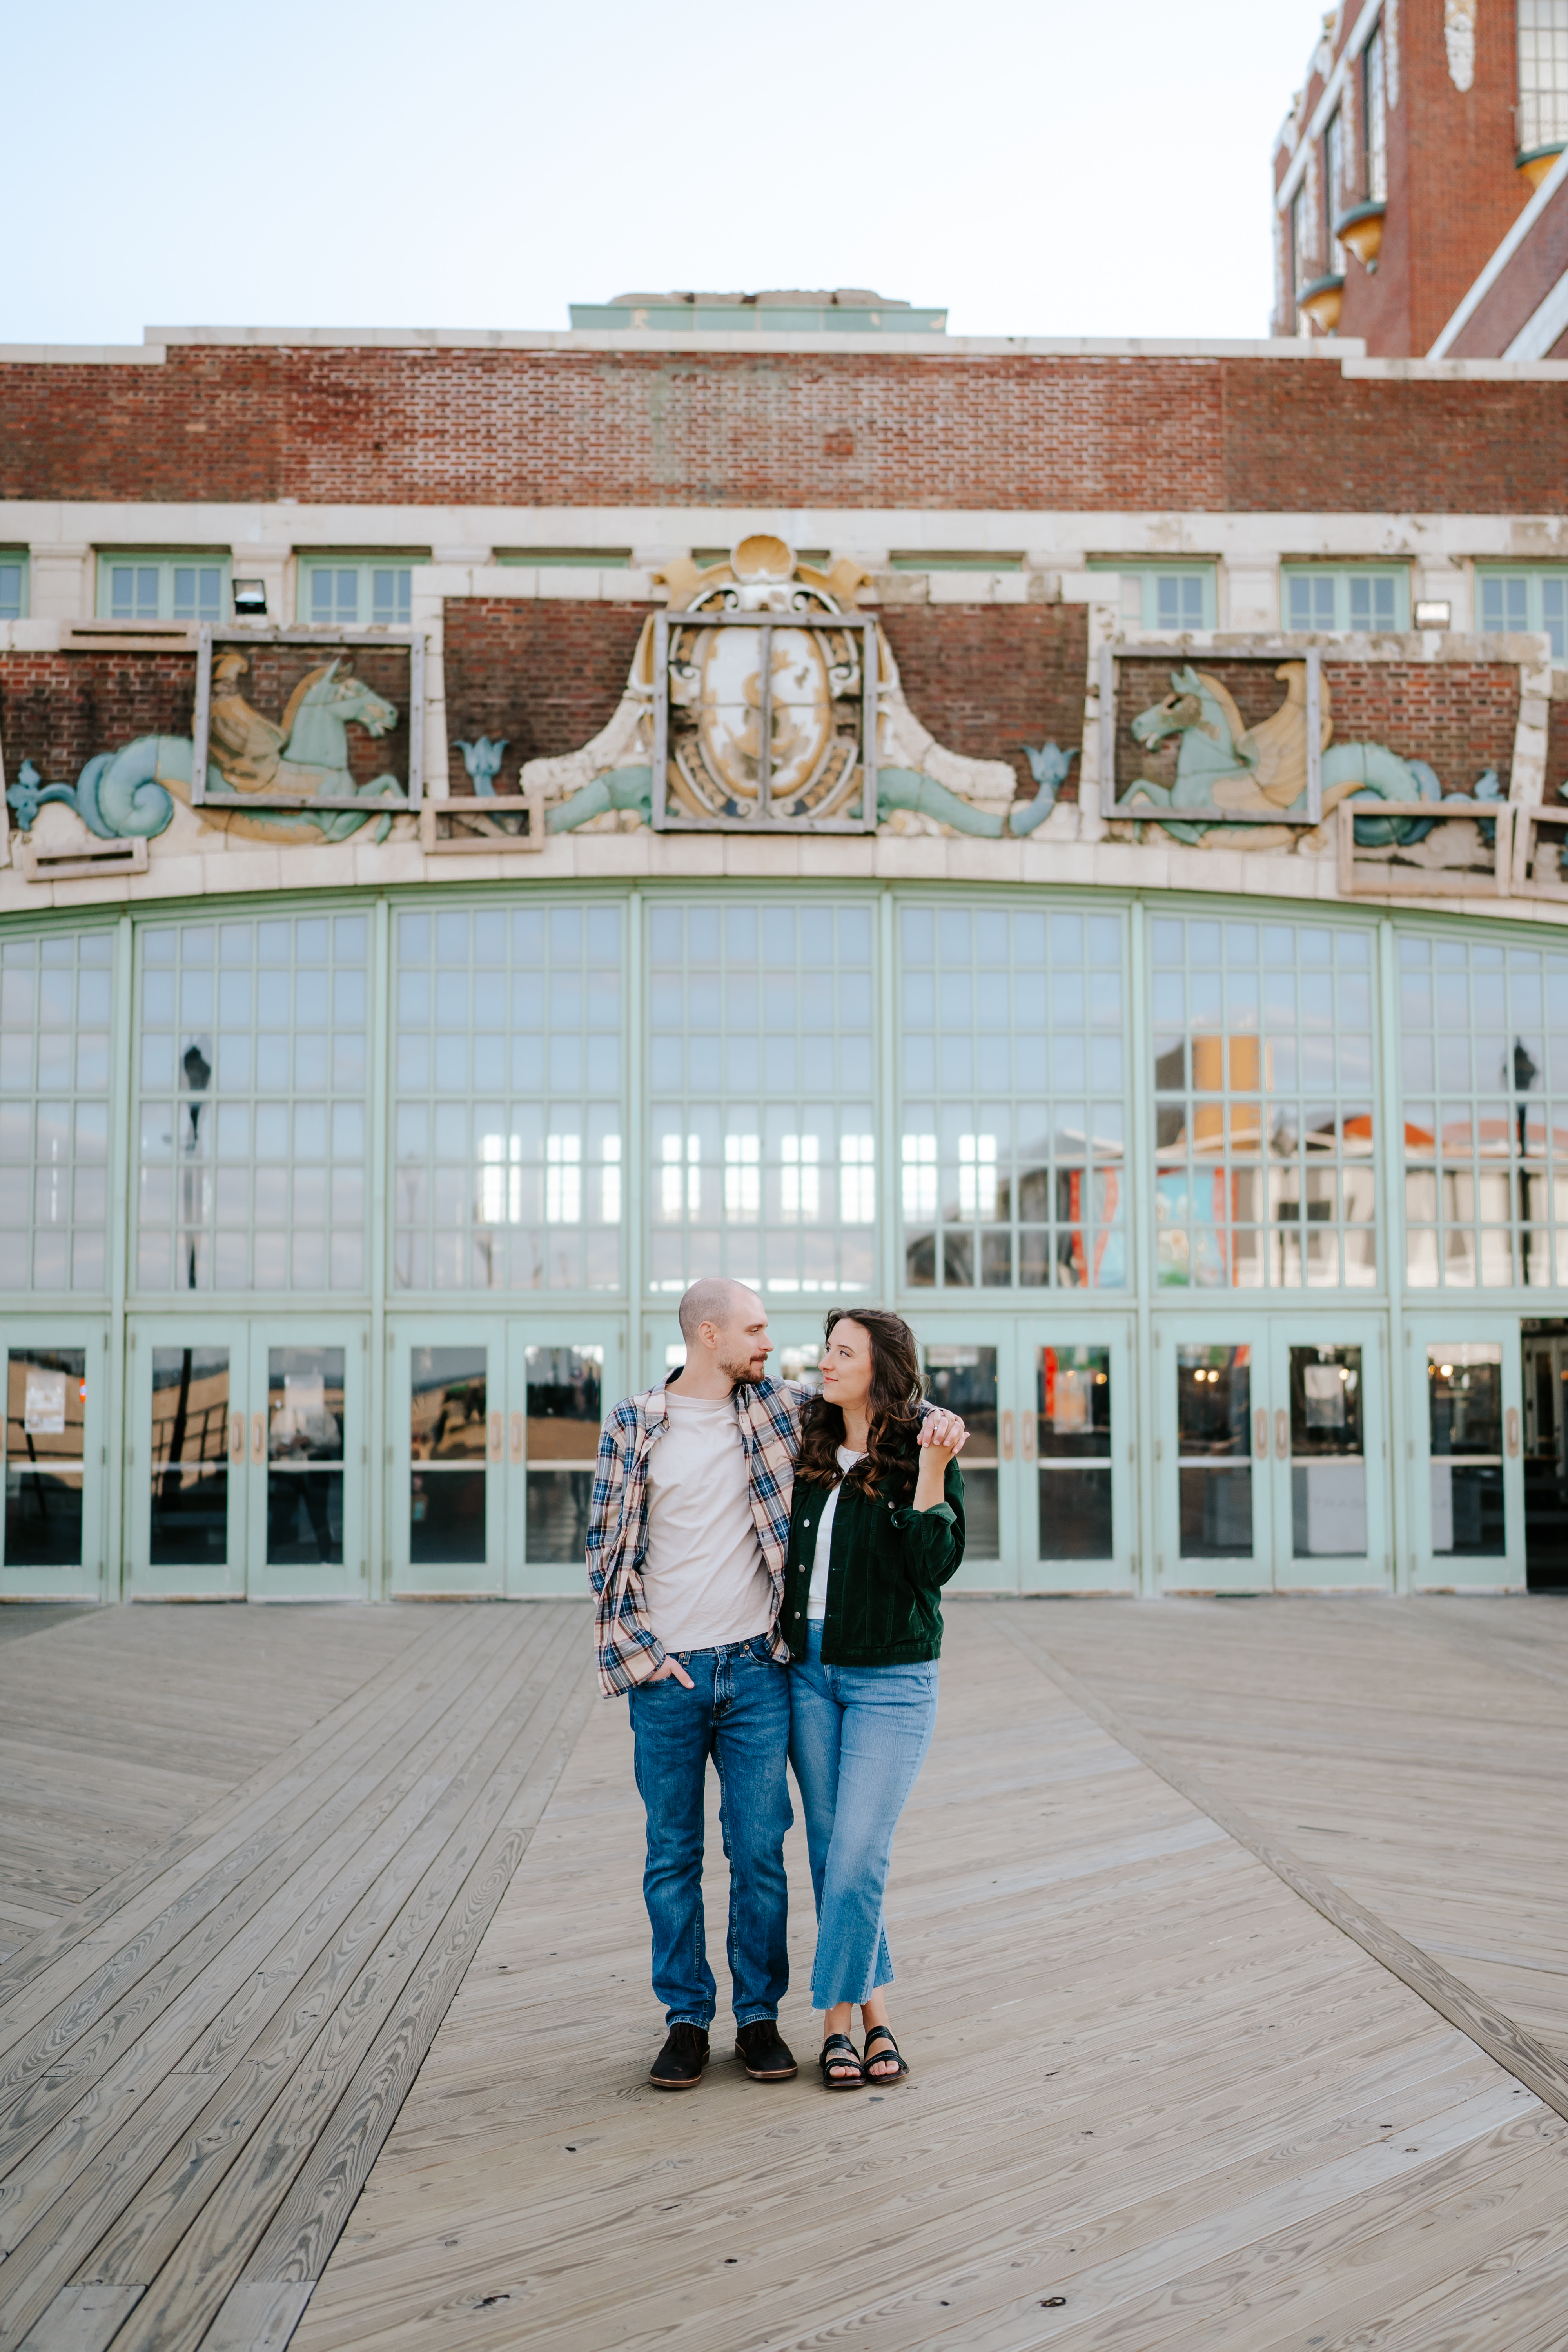 Joyful couple sharing a candid moment during their engagement photo shoot at Asbury Park Boardwalk, captured by Brenna Marie Photography, Maryland's true-to-color and candid storyteller for laid-back couples